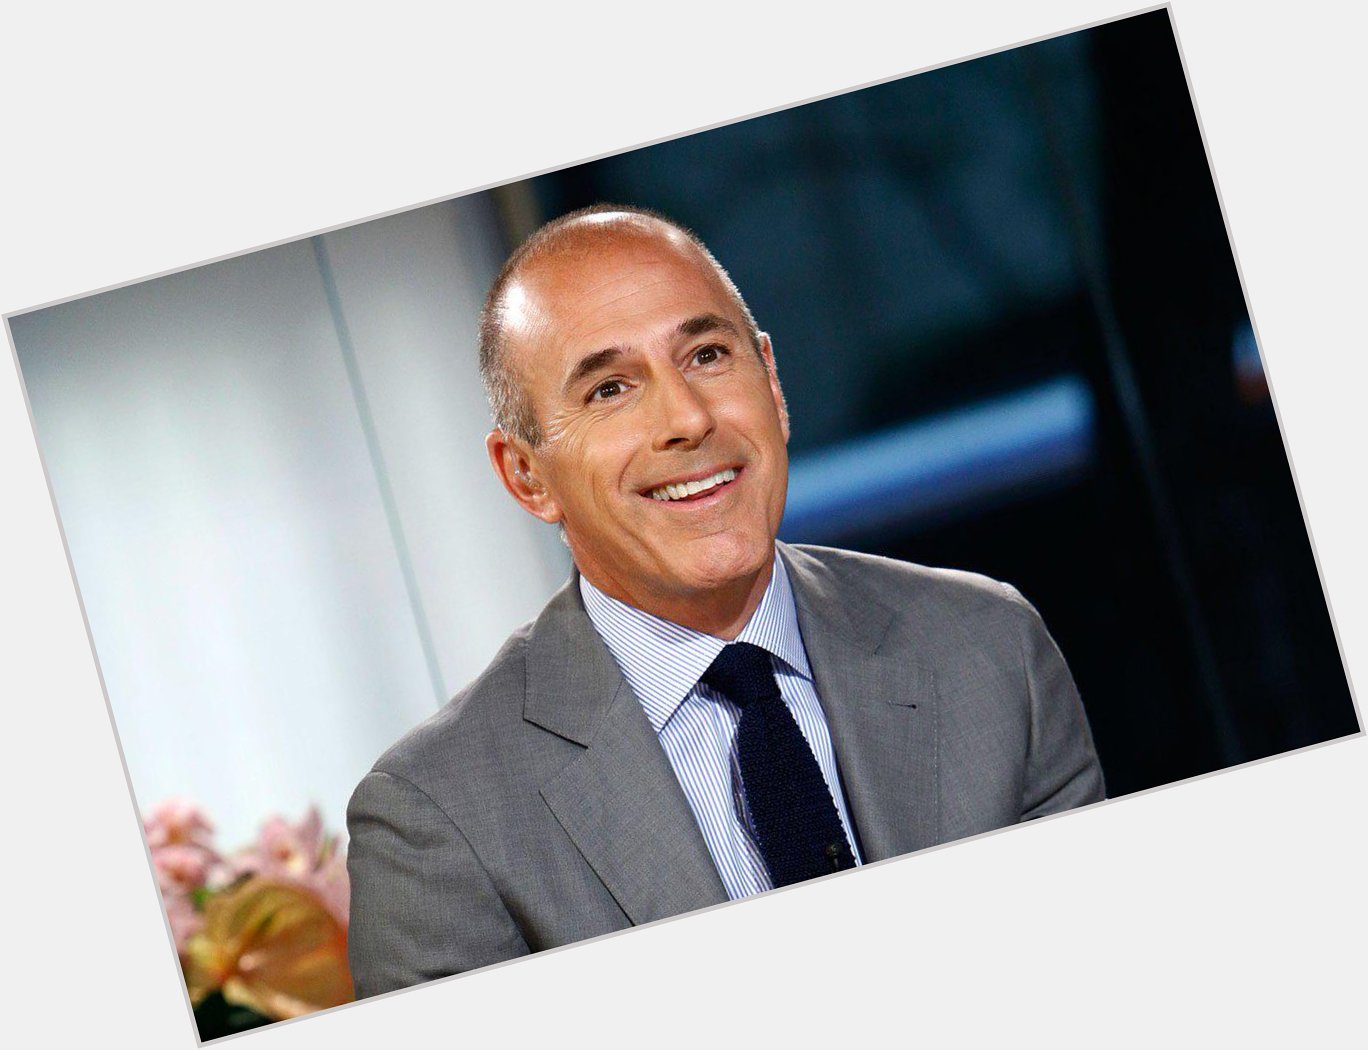 Happy 57th birthday to Matt Lauer.  What do you think of his work? 